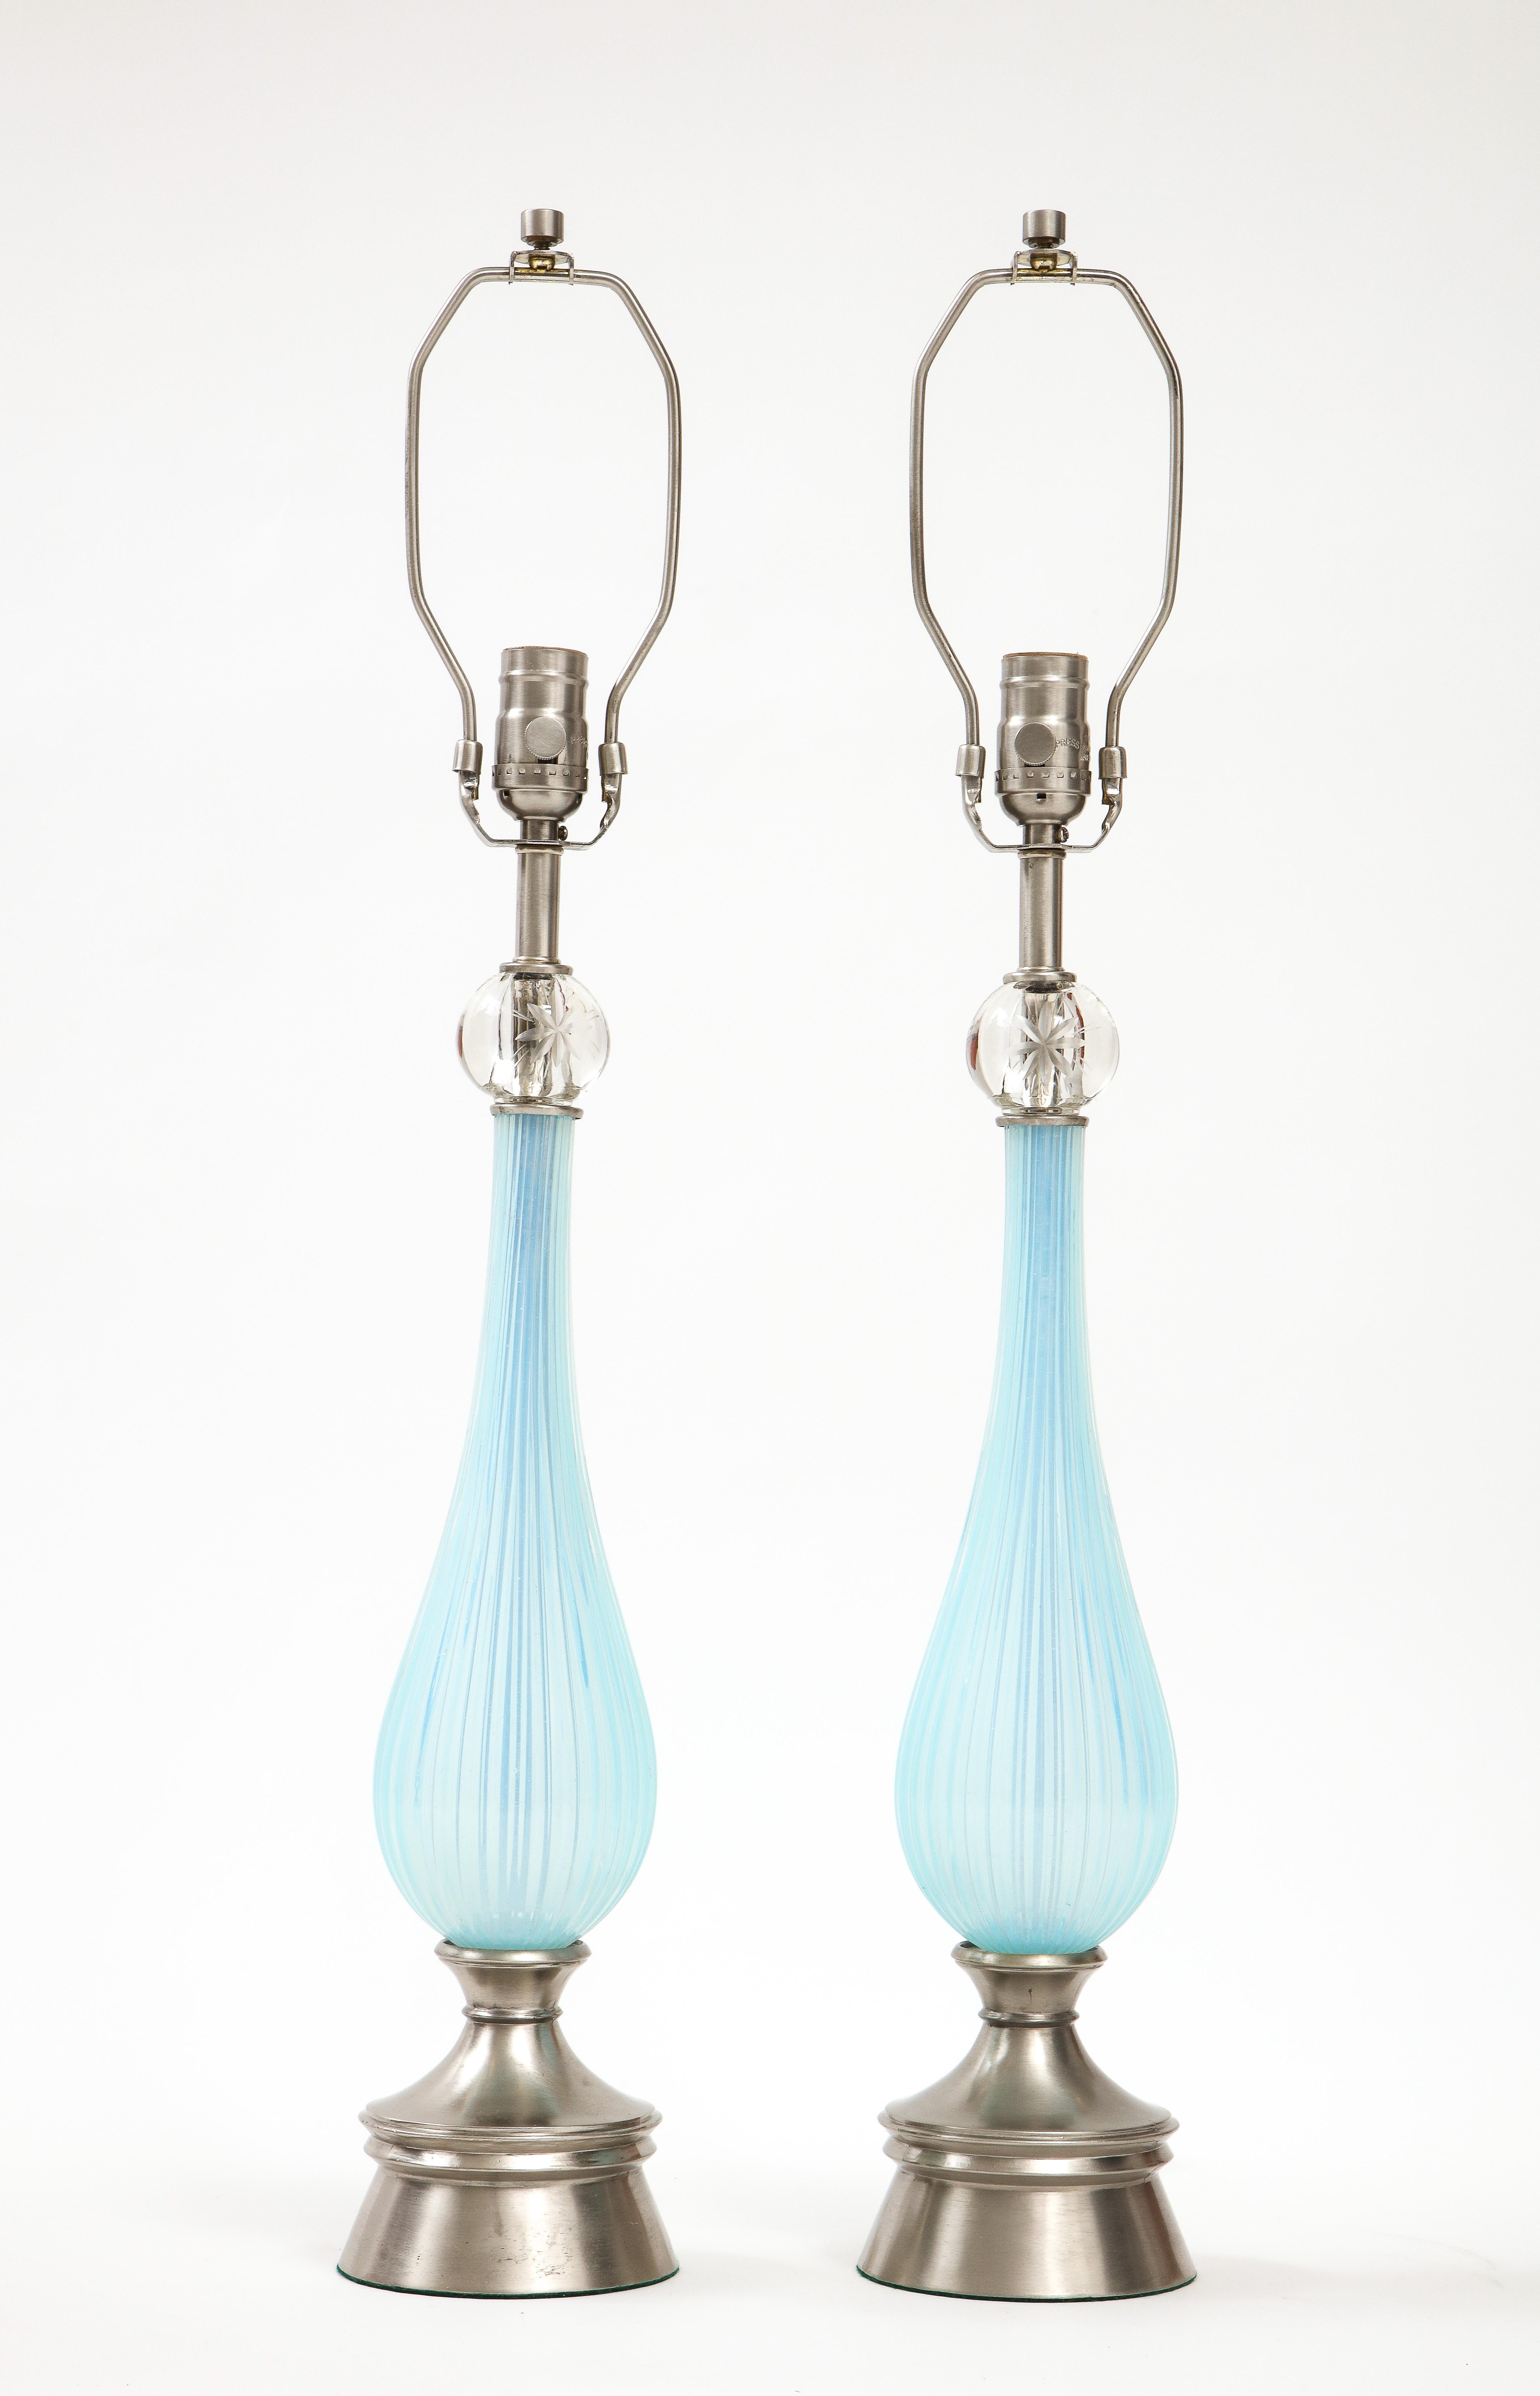 Pair of Mid Century Murano glass lamps in a lilac/periwinkle color. The glass bodies feature a fluted design which is topped by an glass orb with an etched star element. Lamps sit upon a turned nickel base. Rewired for use in USA, 100W max bulbs.